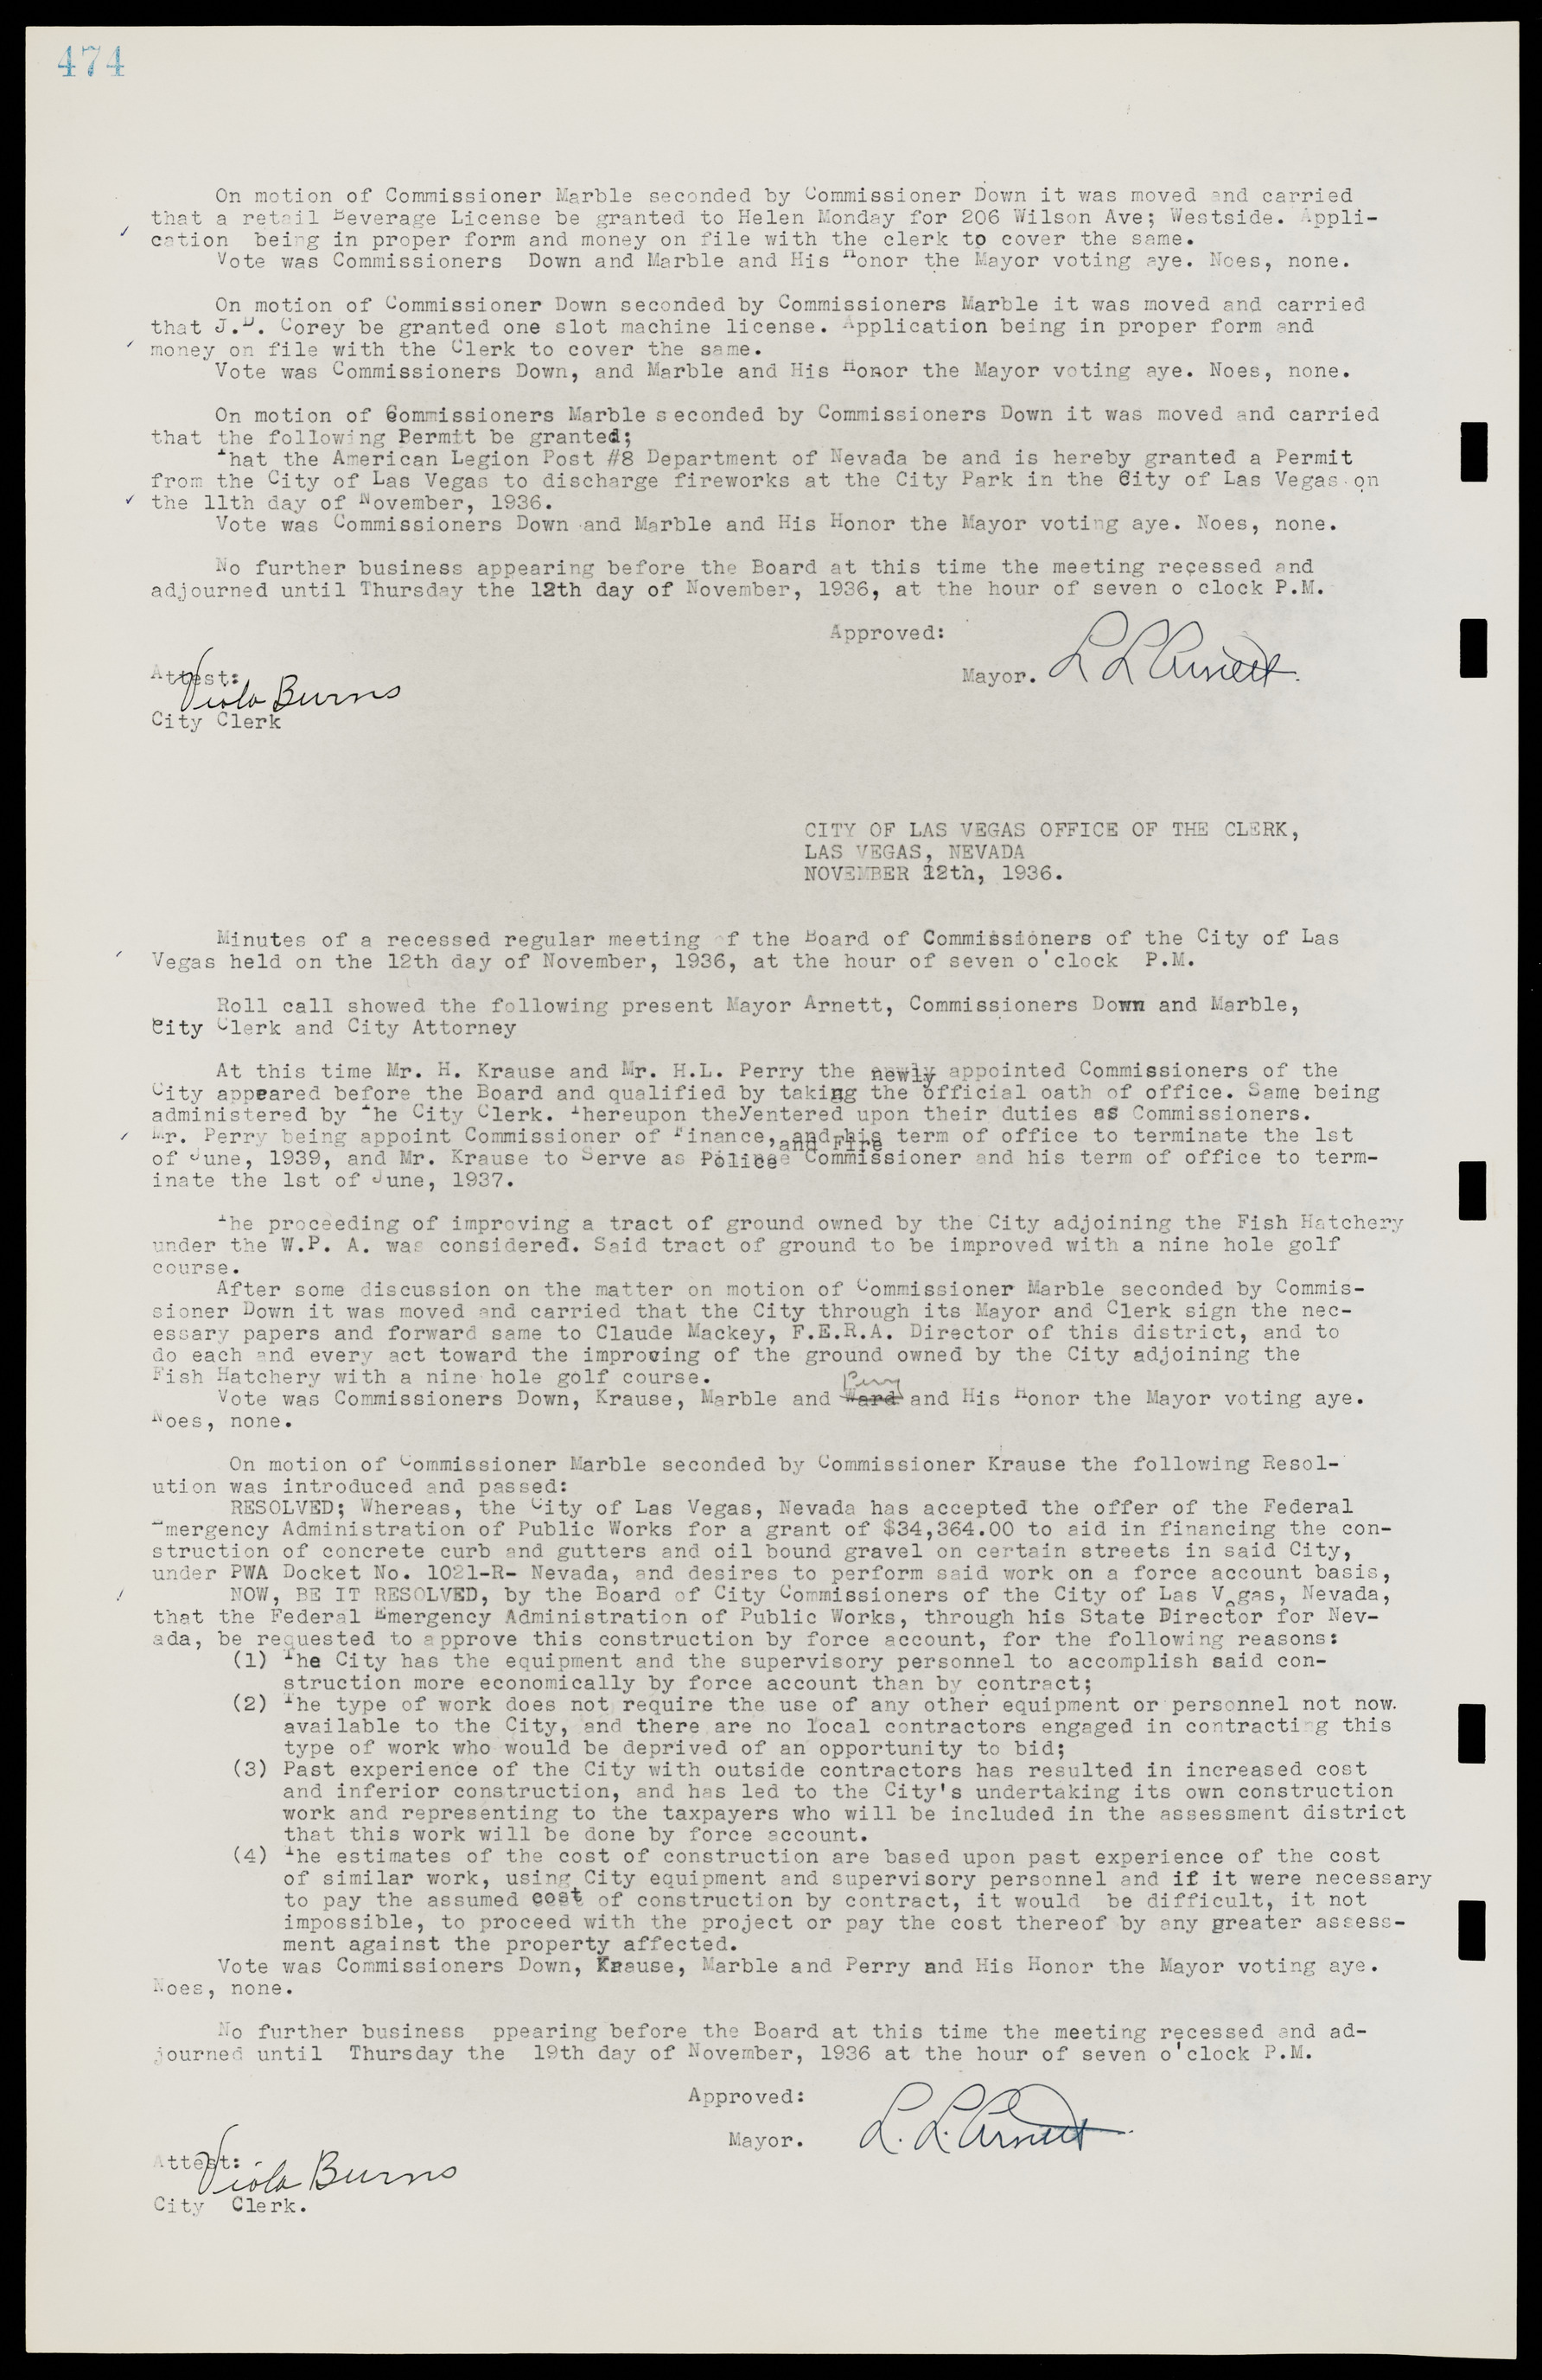 Las Vegas City Commission Minutes, May 14, 1929 to February 11, 1937, lvc000003-481